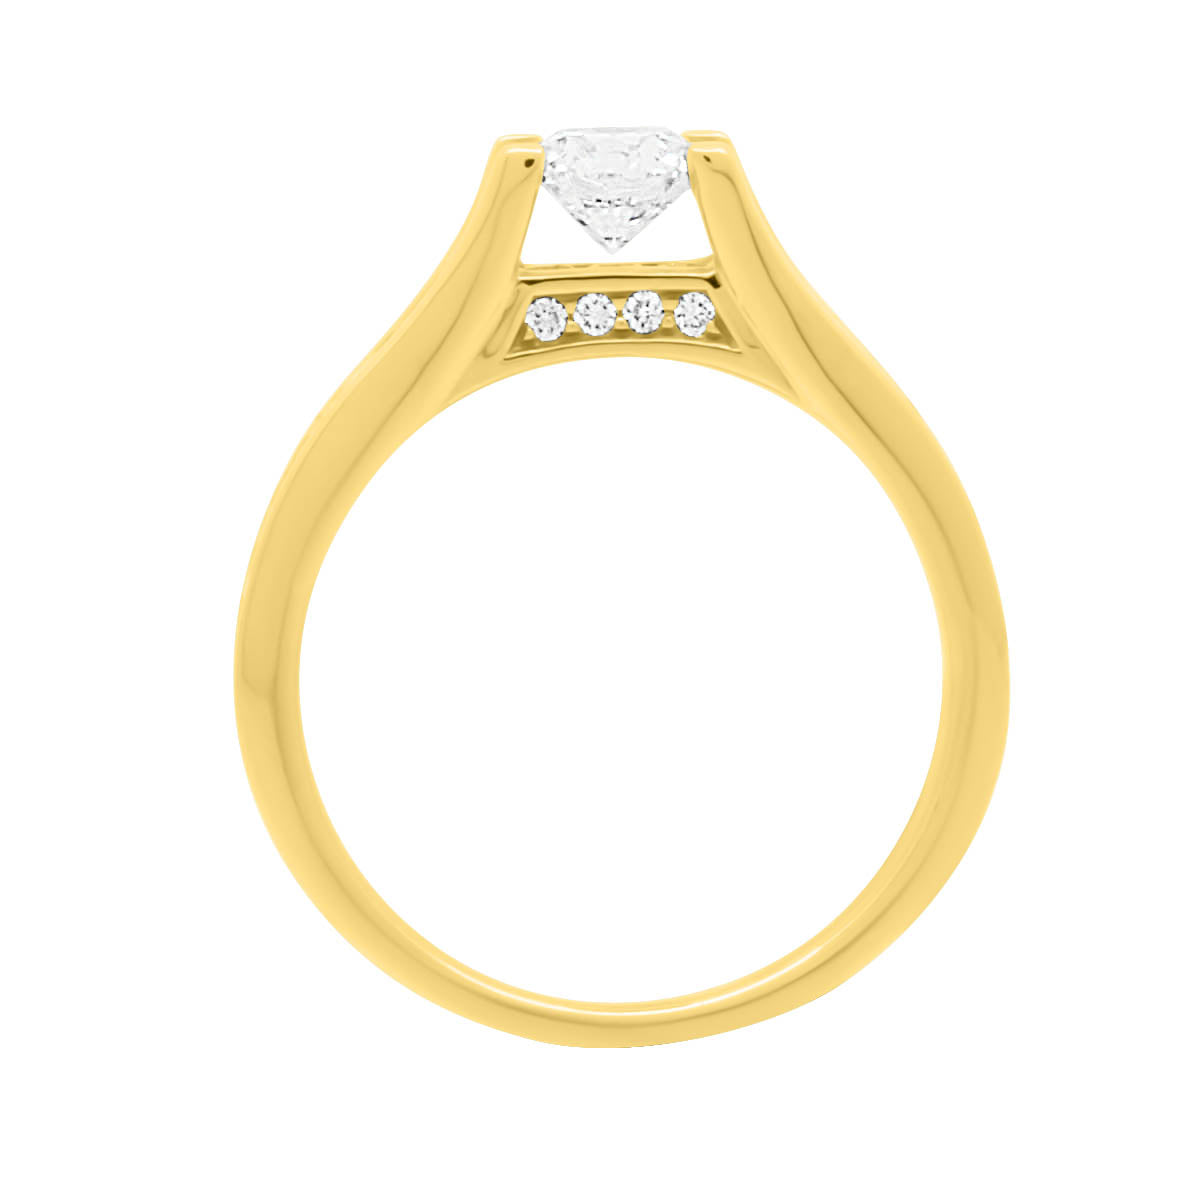 Floating Diamond With Channel Set Rounds SET IN YELLOW GOLD picutured in an upright position